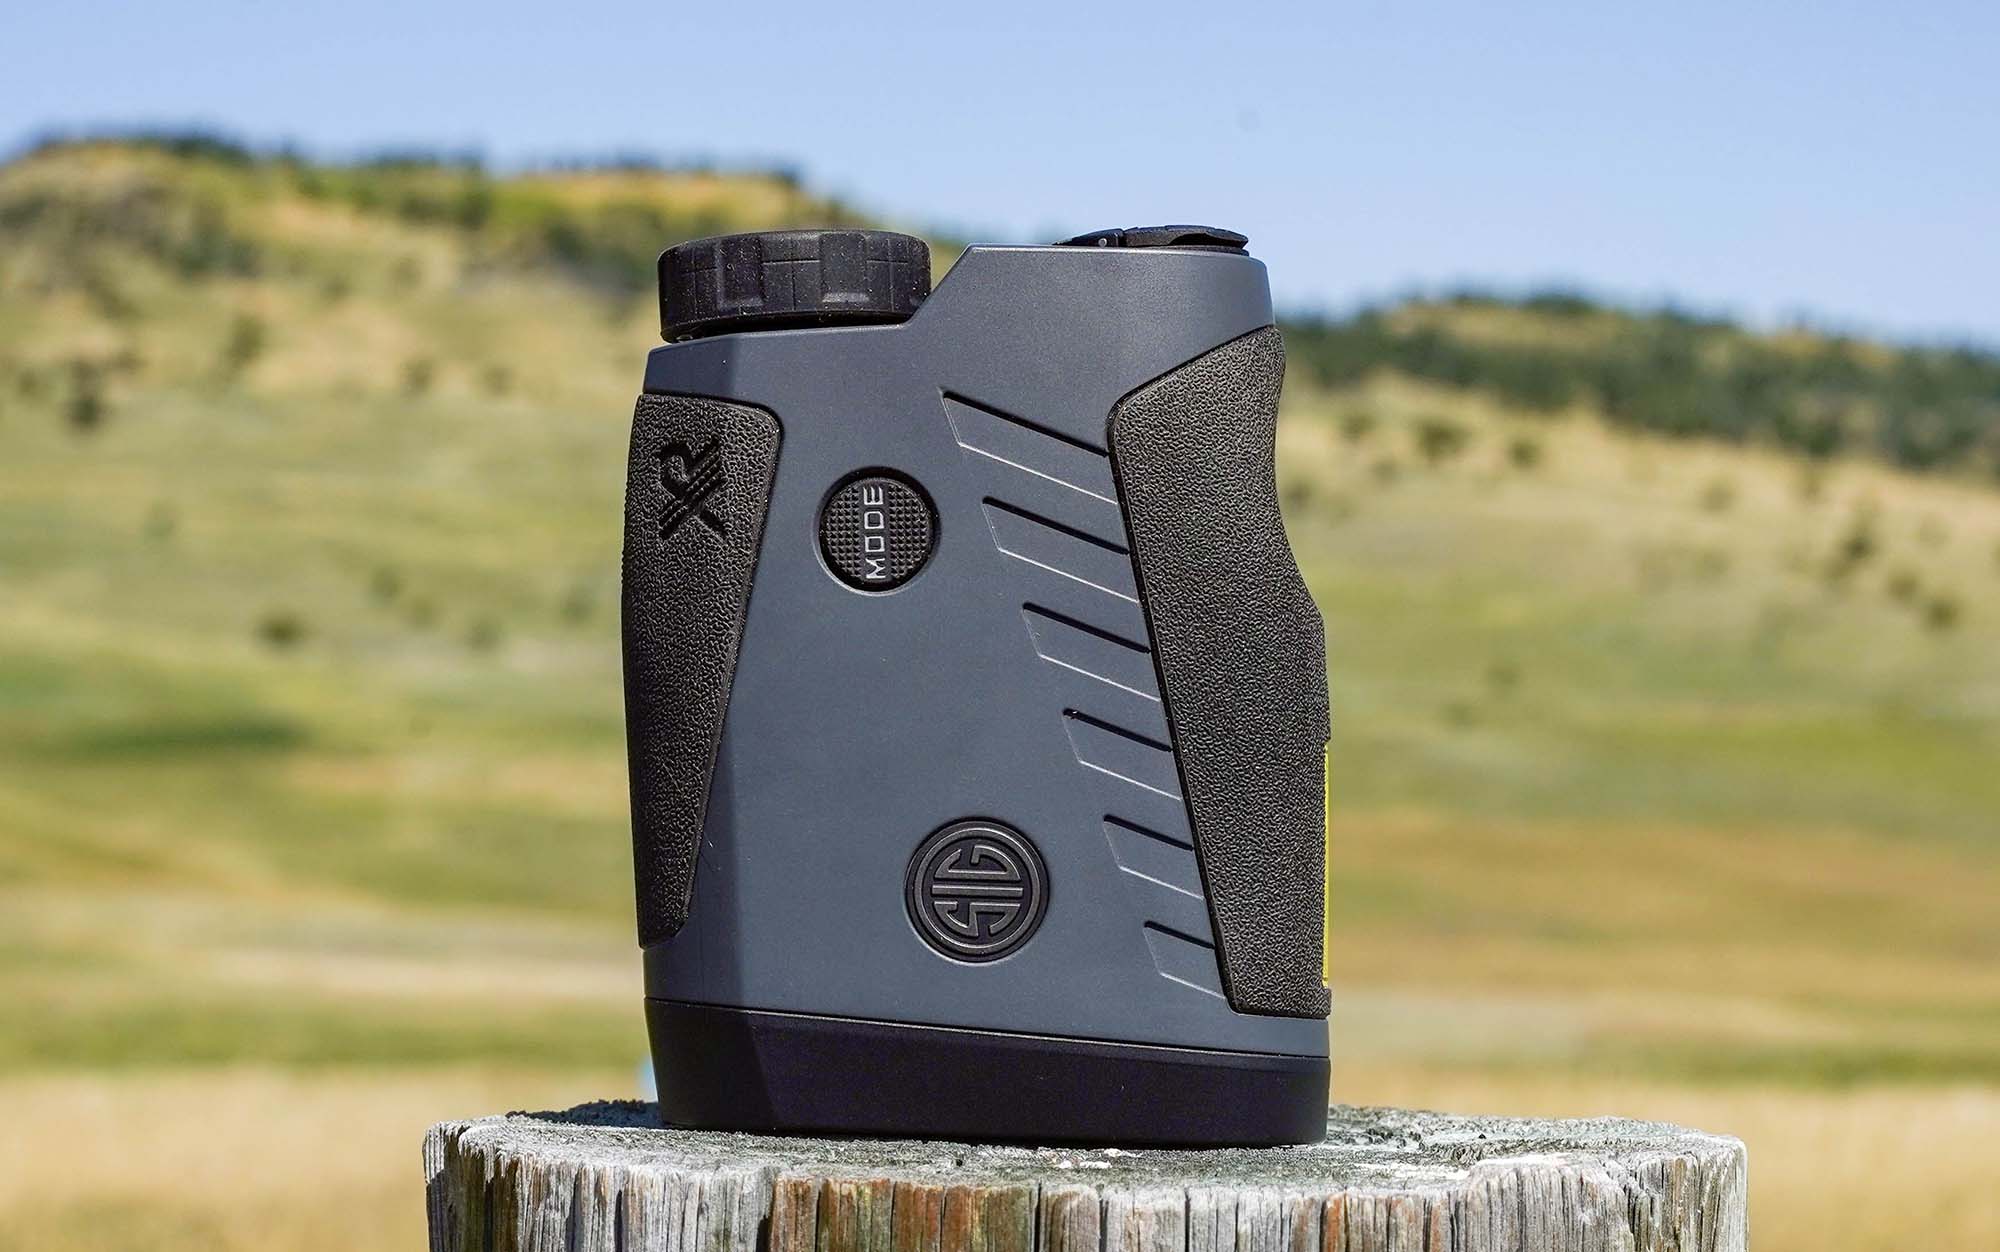 The best overall rangefinder, the Sig XR